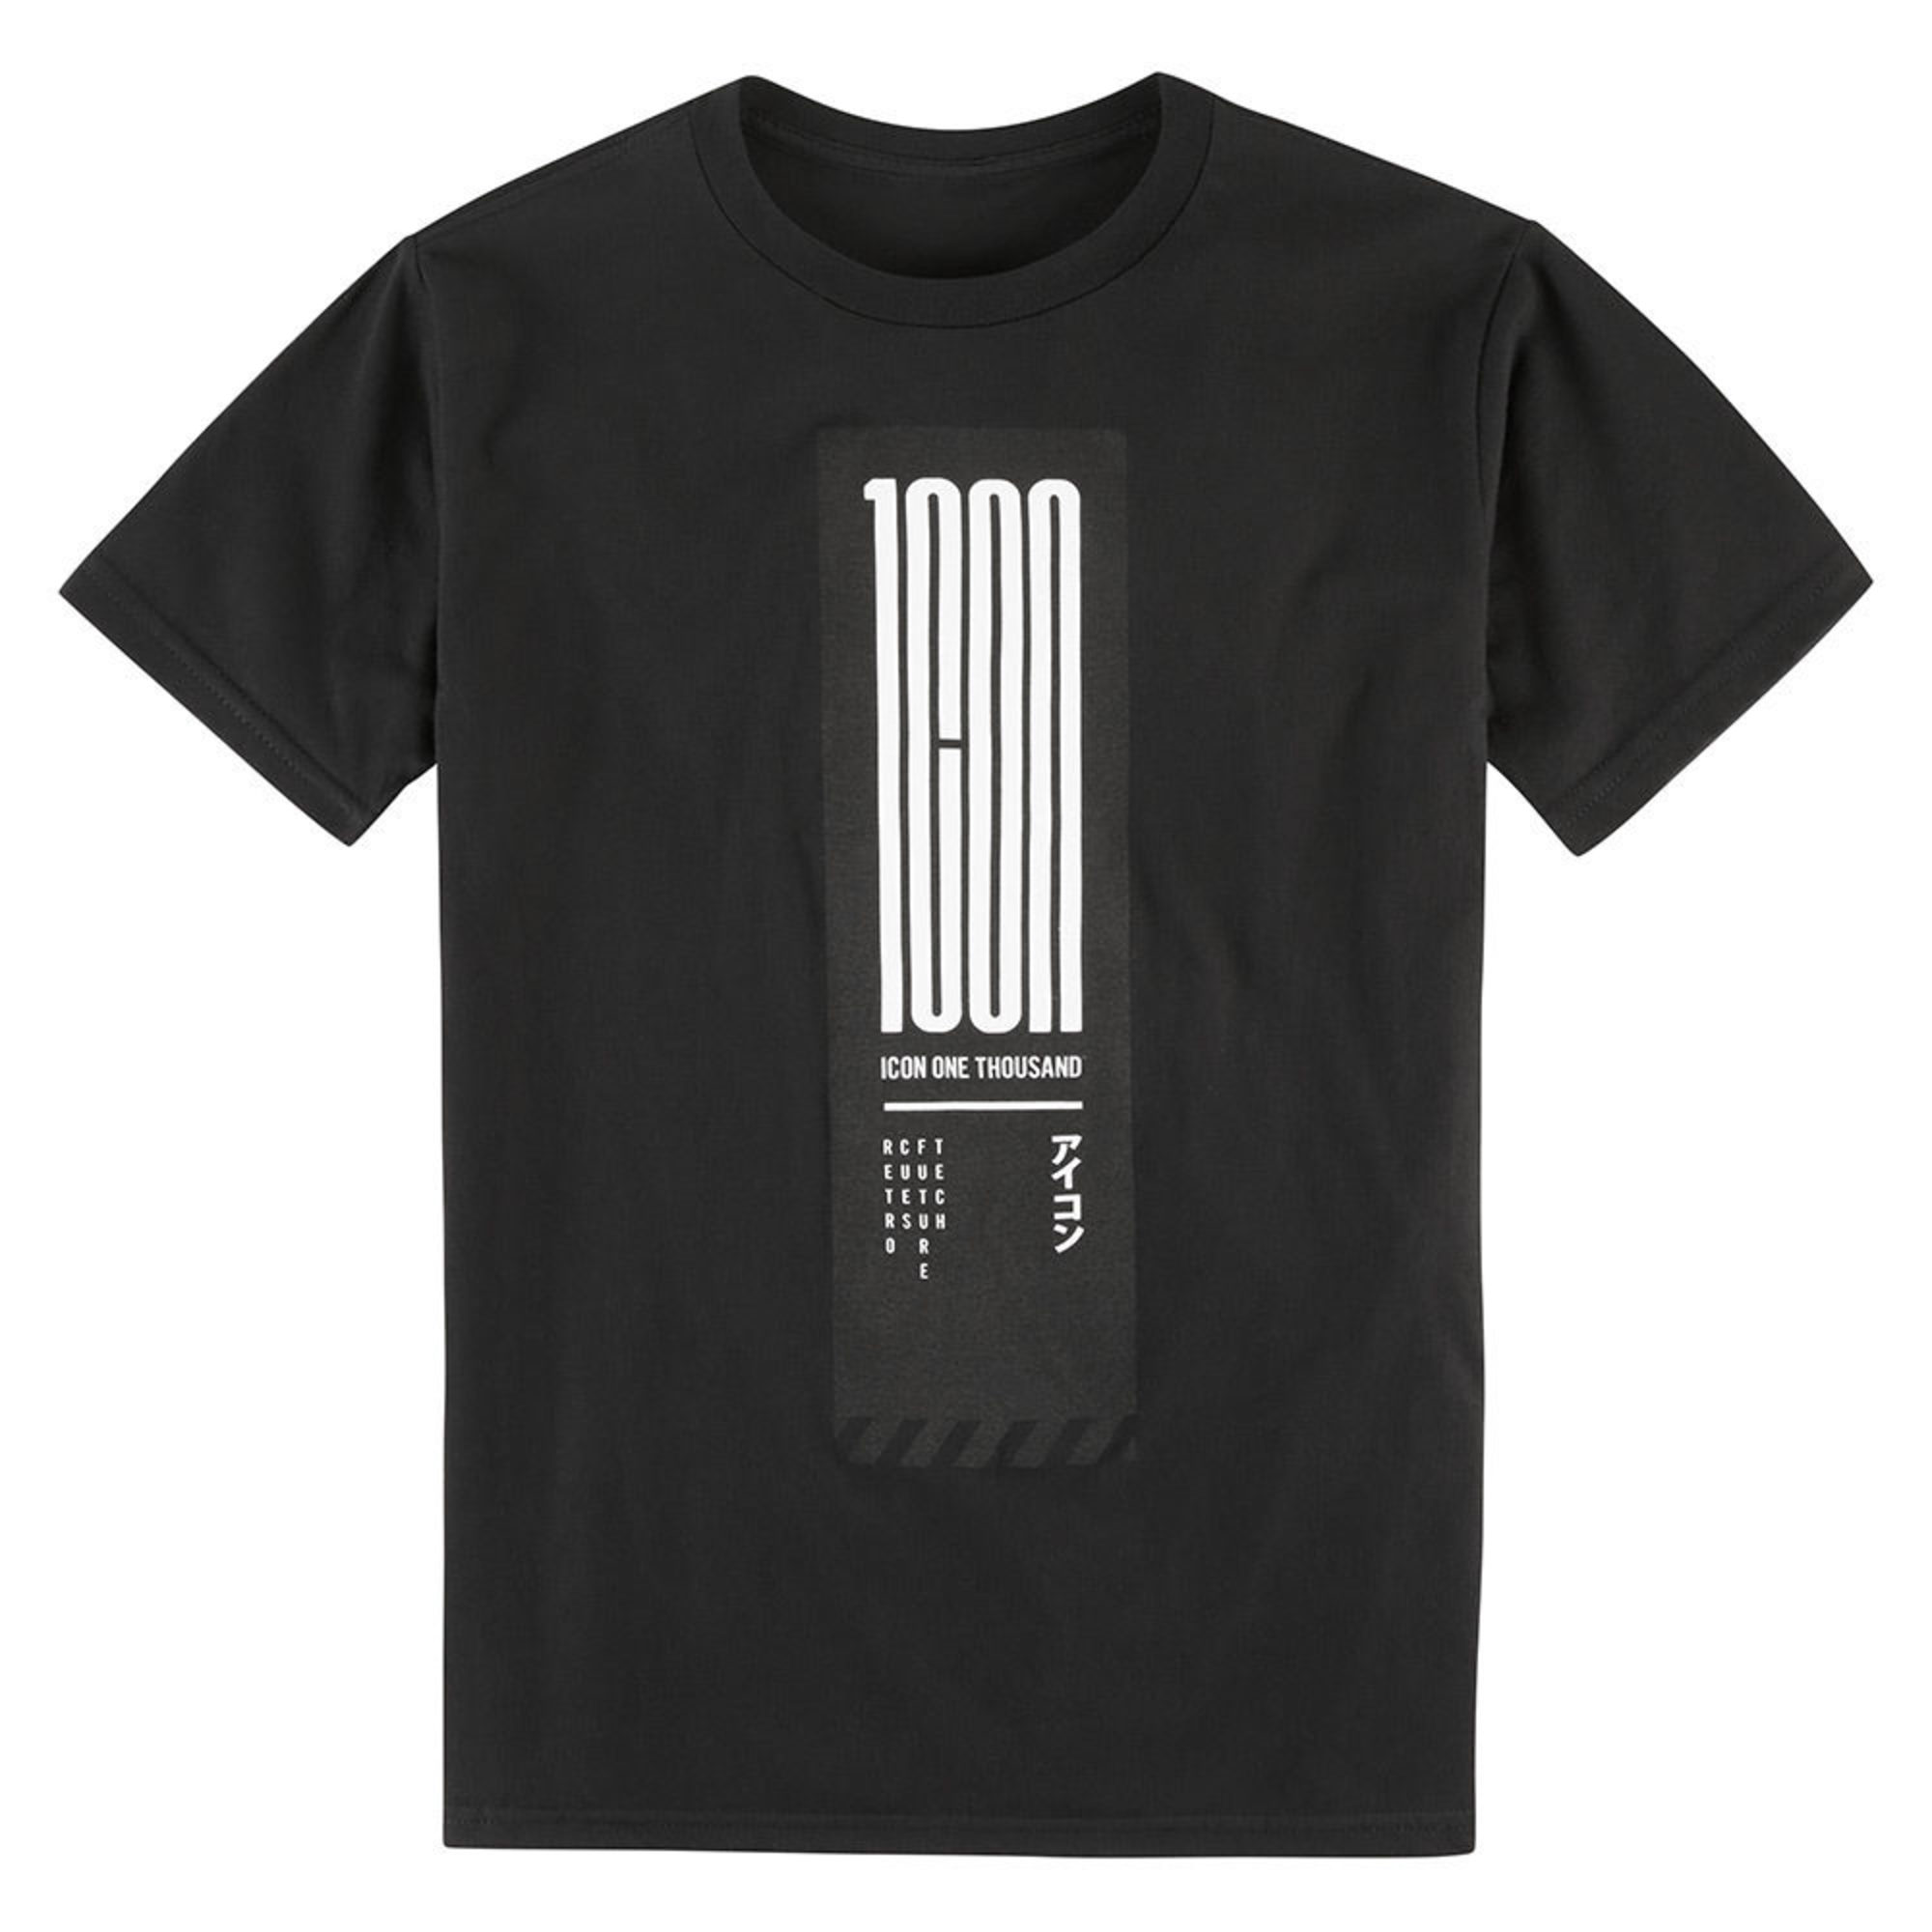 icon t-shirt shirts for men one thousand neon tokyo